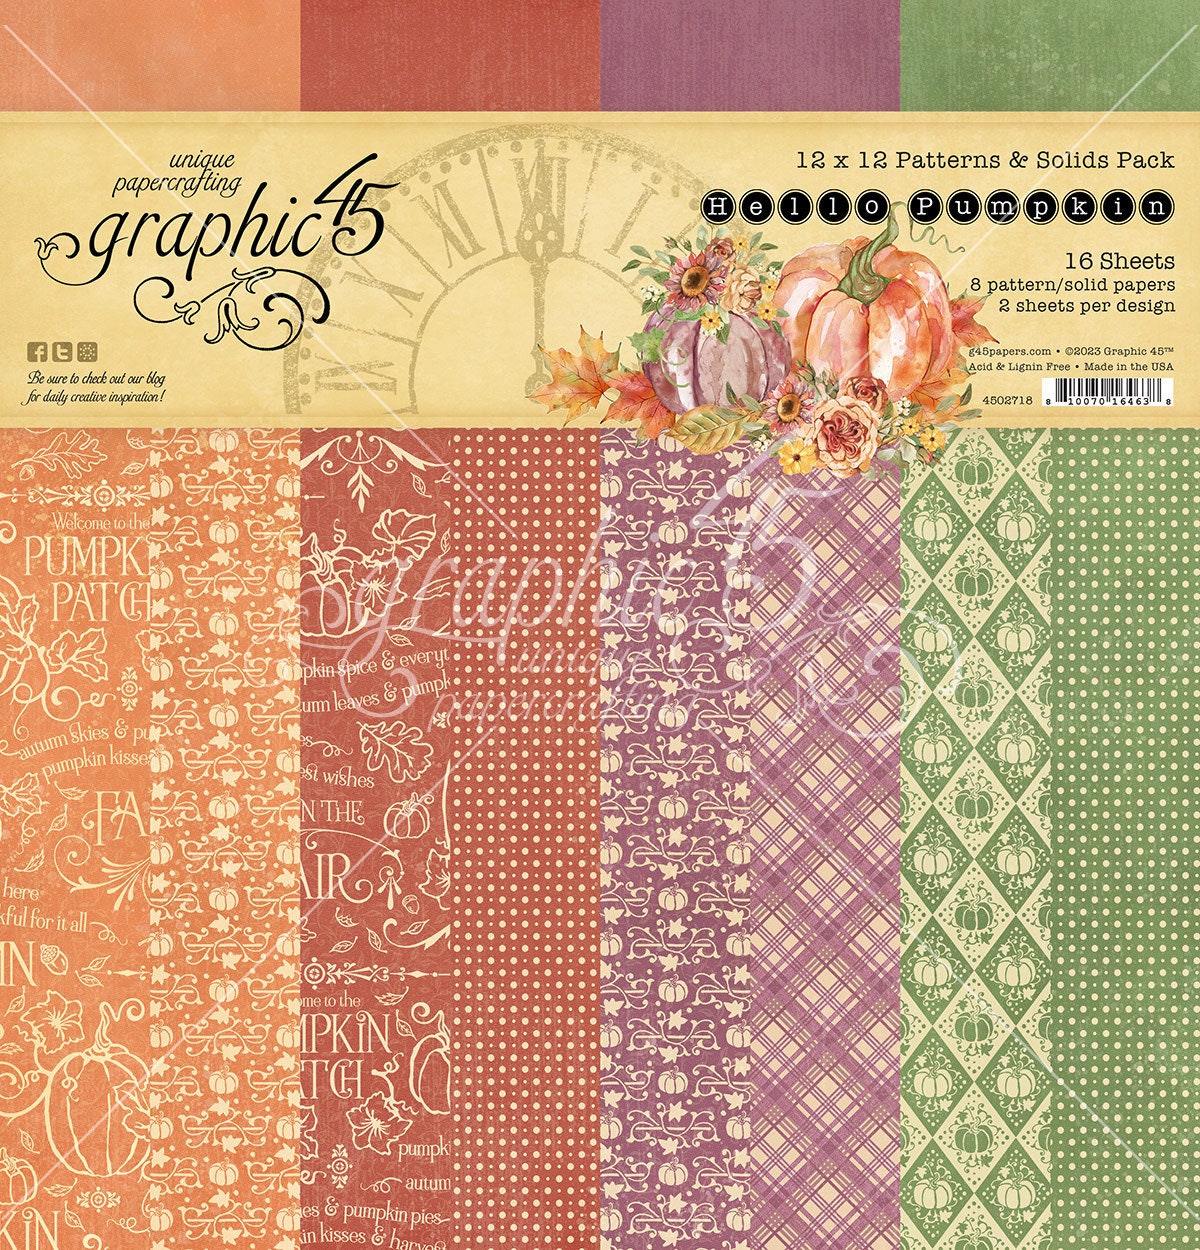 I Love Fall: Fall Is Here 12x12 Patterned Paper